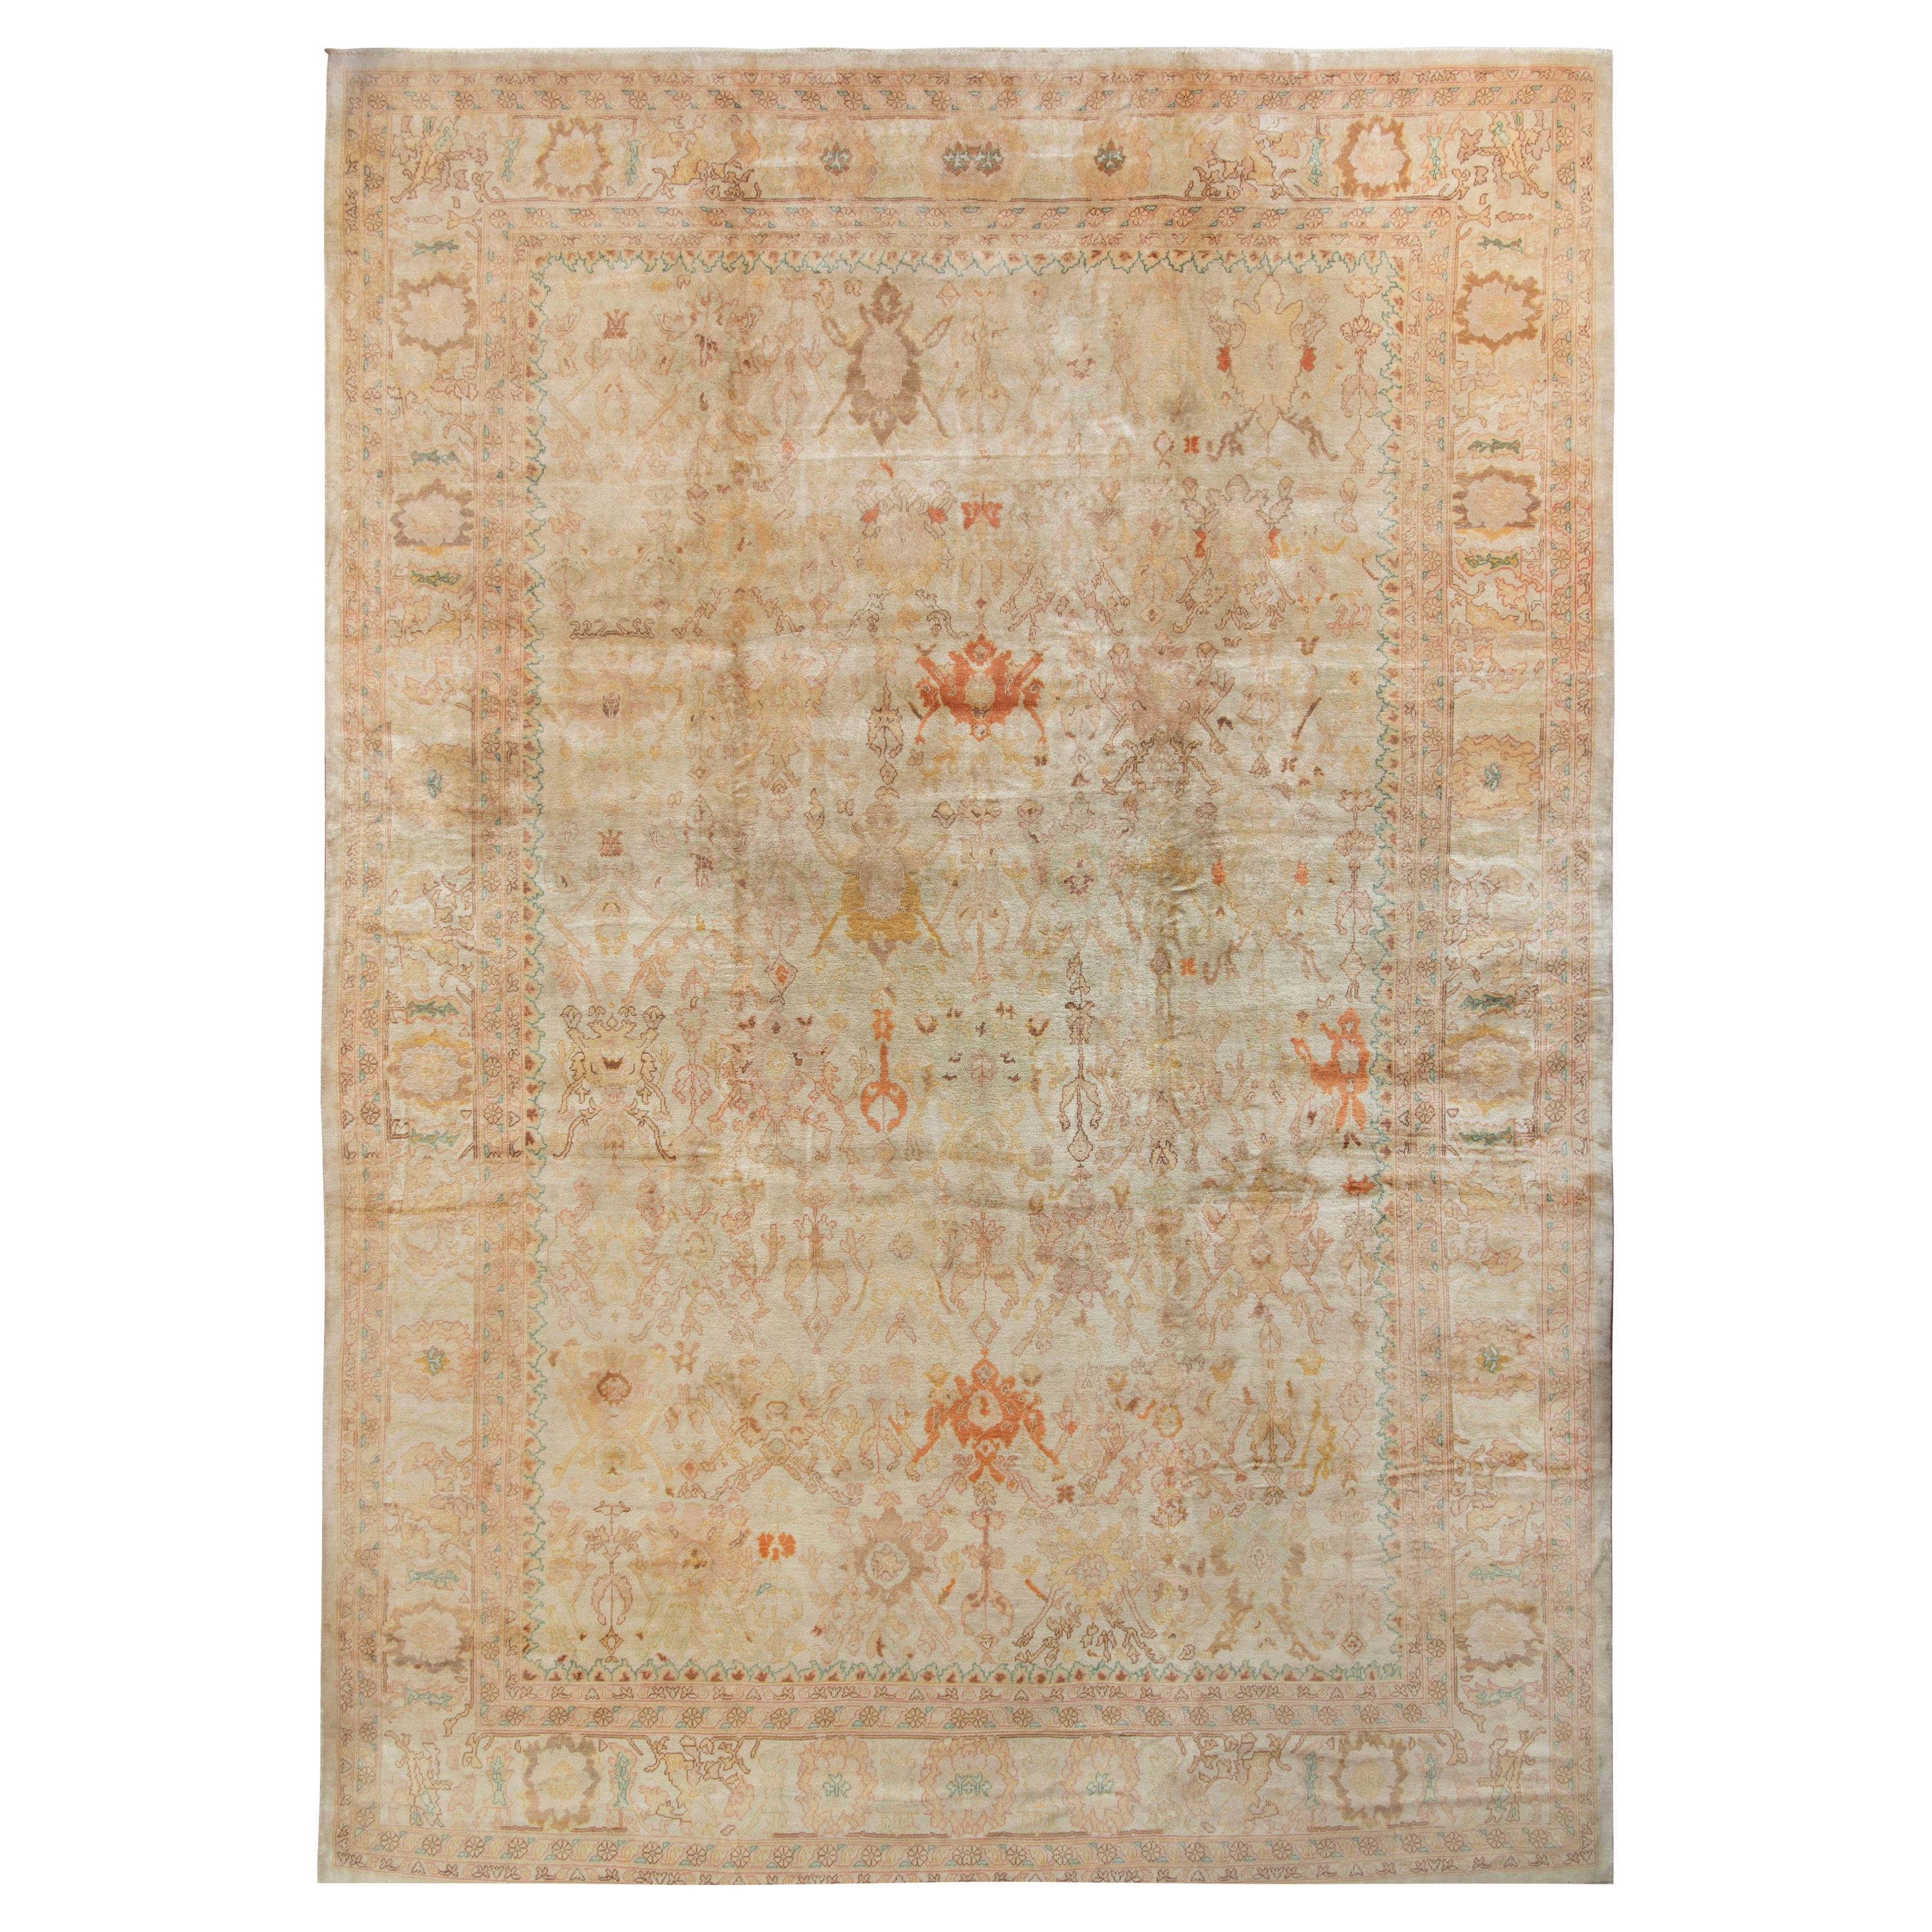 Rug & Kilim’s Oushak Style Rug in Beige-Brown with Floral Patterns For Sale